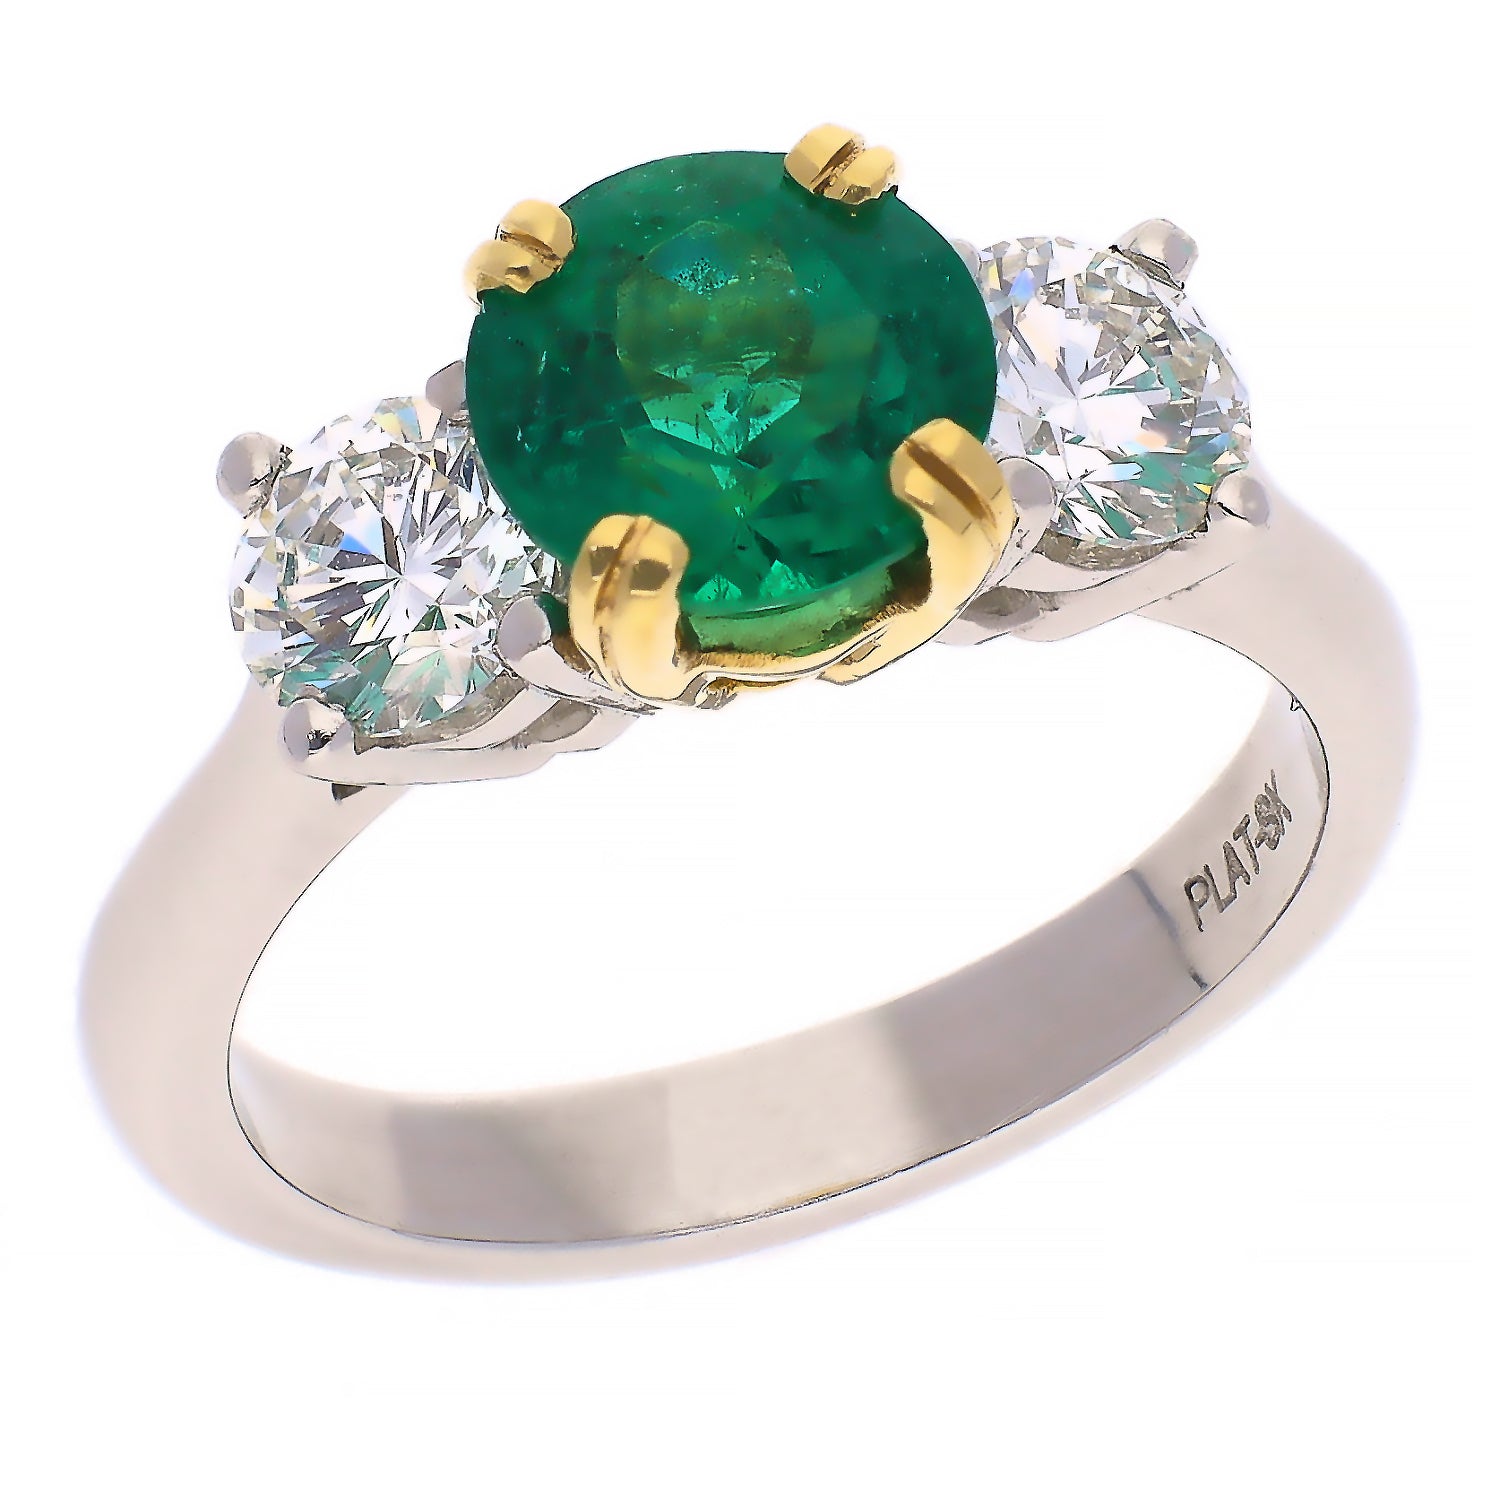 18K Yellow Gold and Platinum Emerald and Diamond Ring